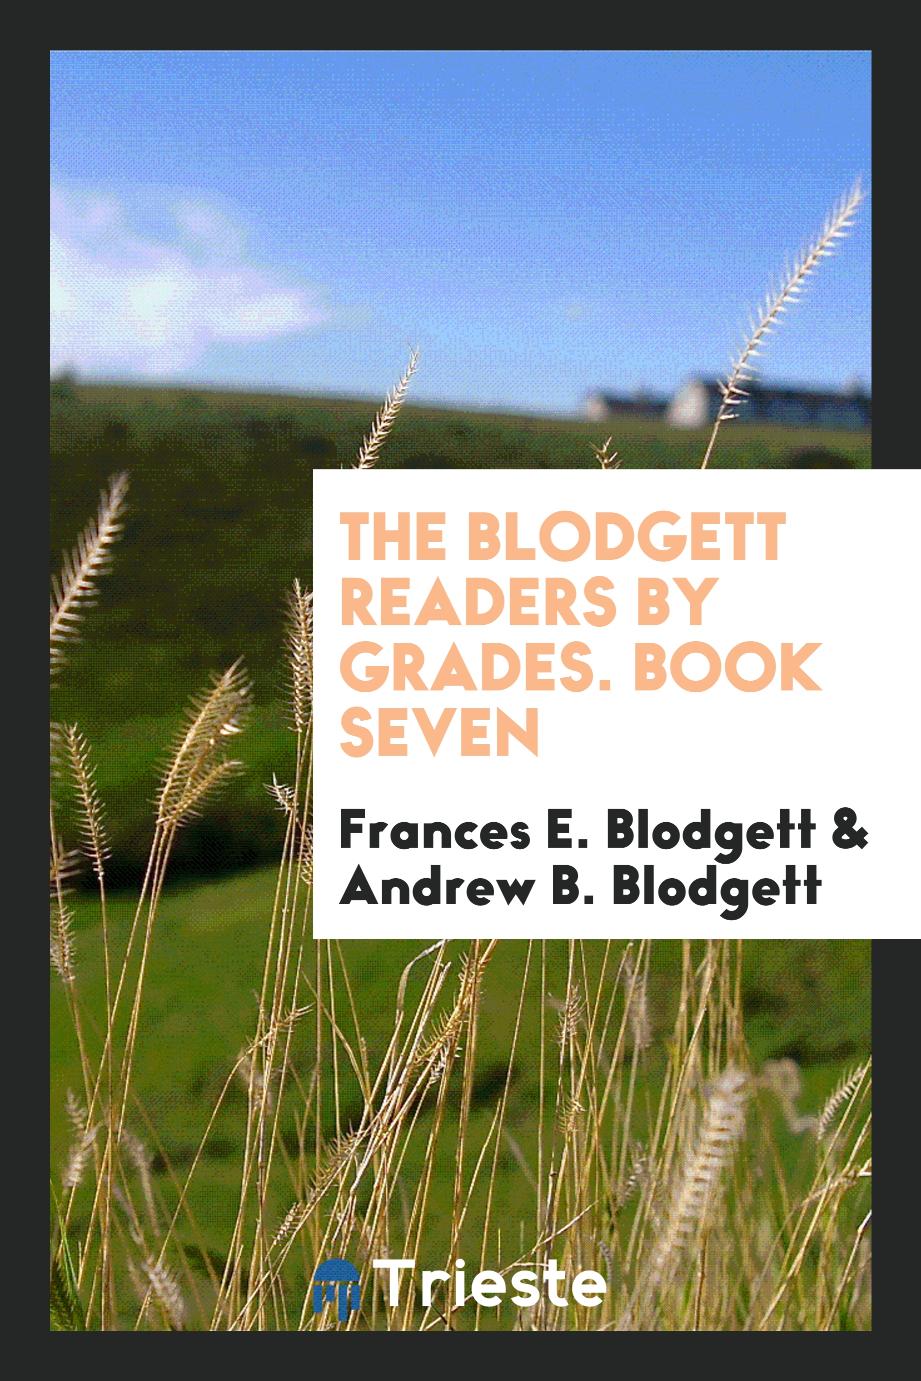 The Blodgett Readers by Grades. Book Seven